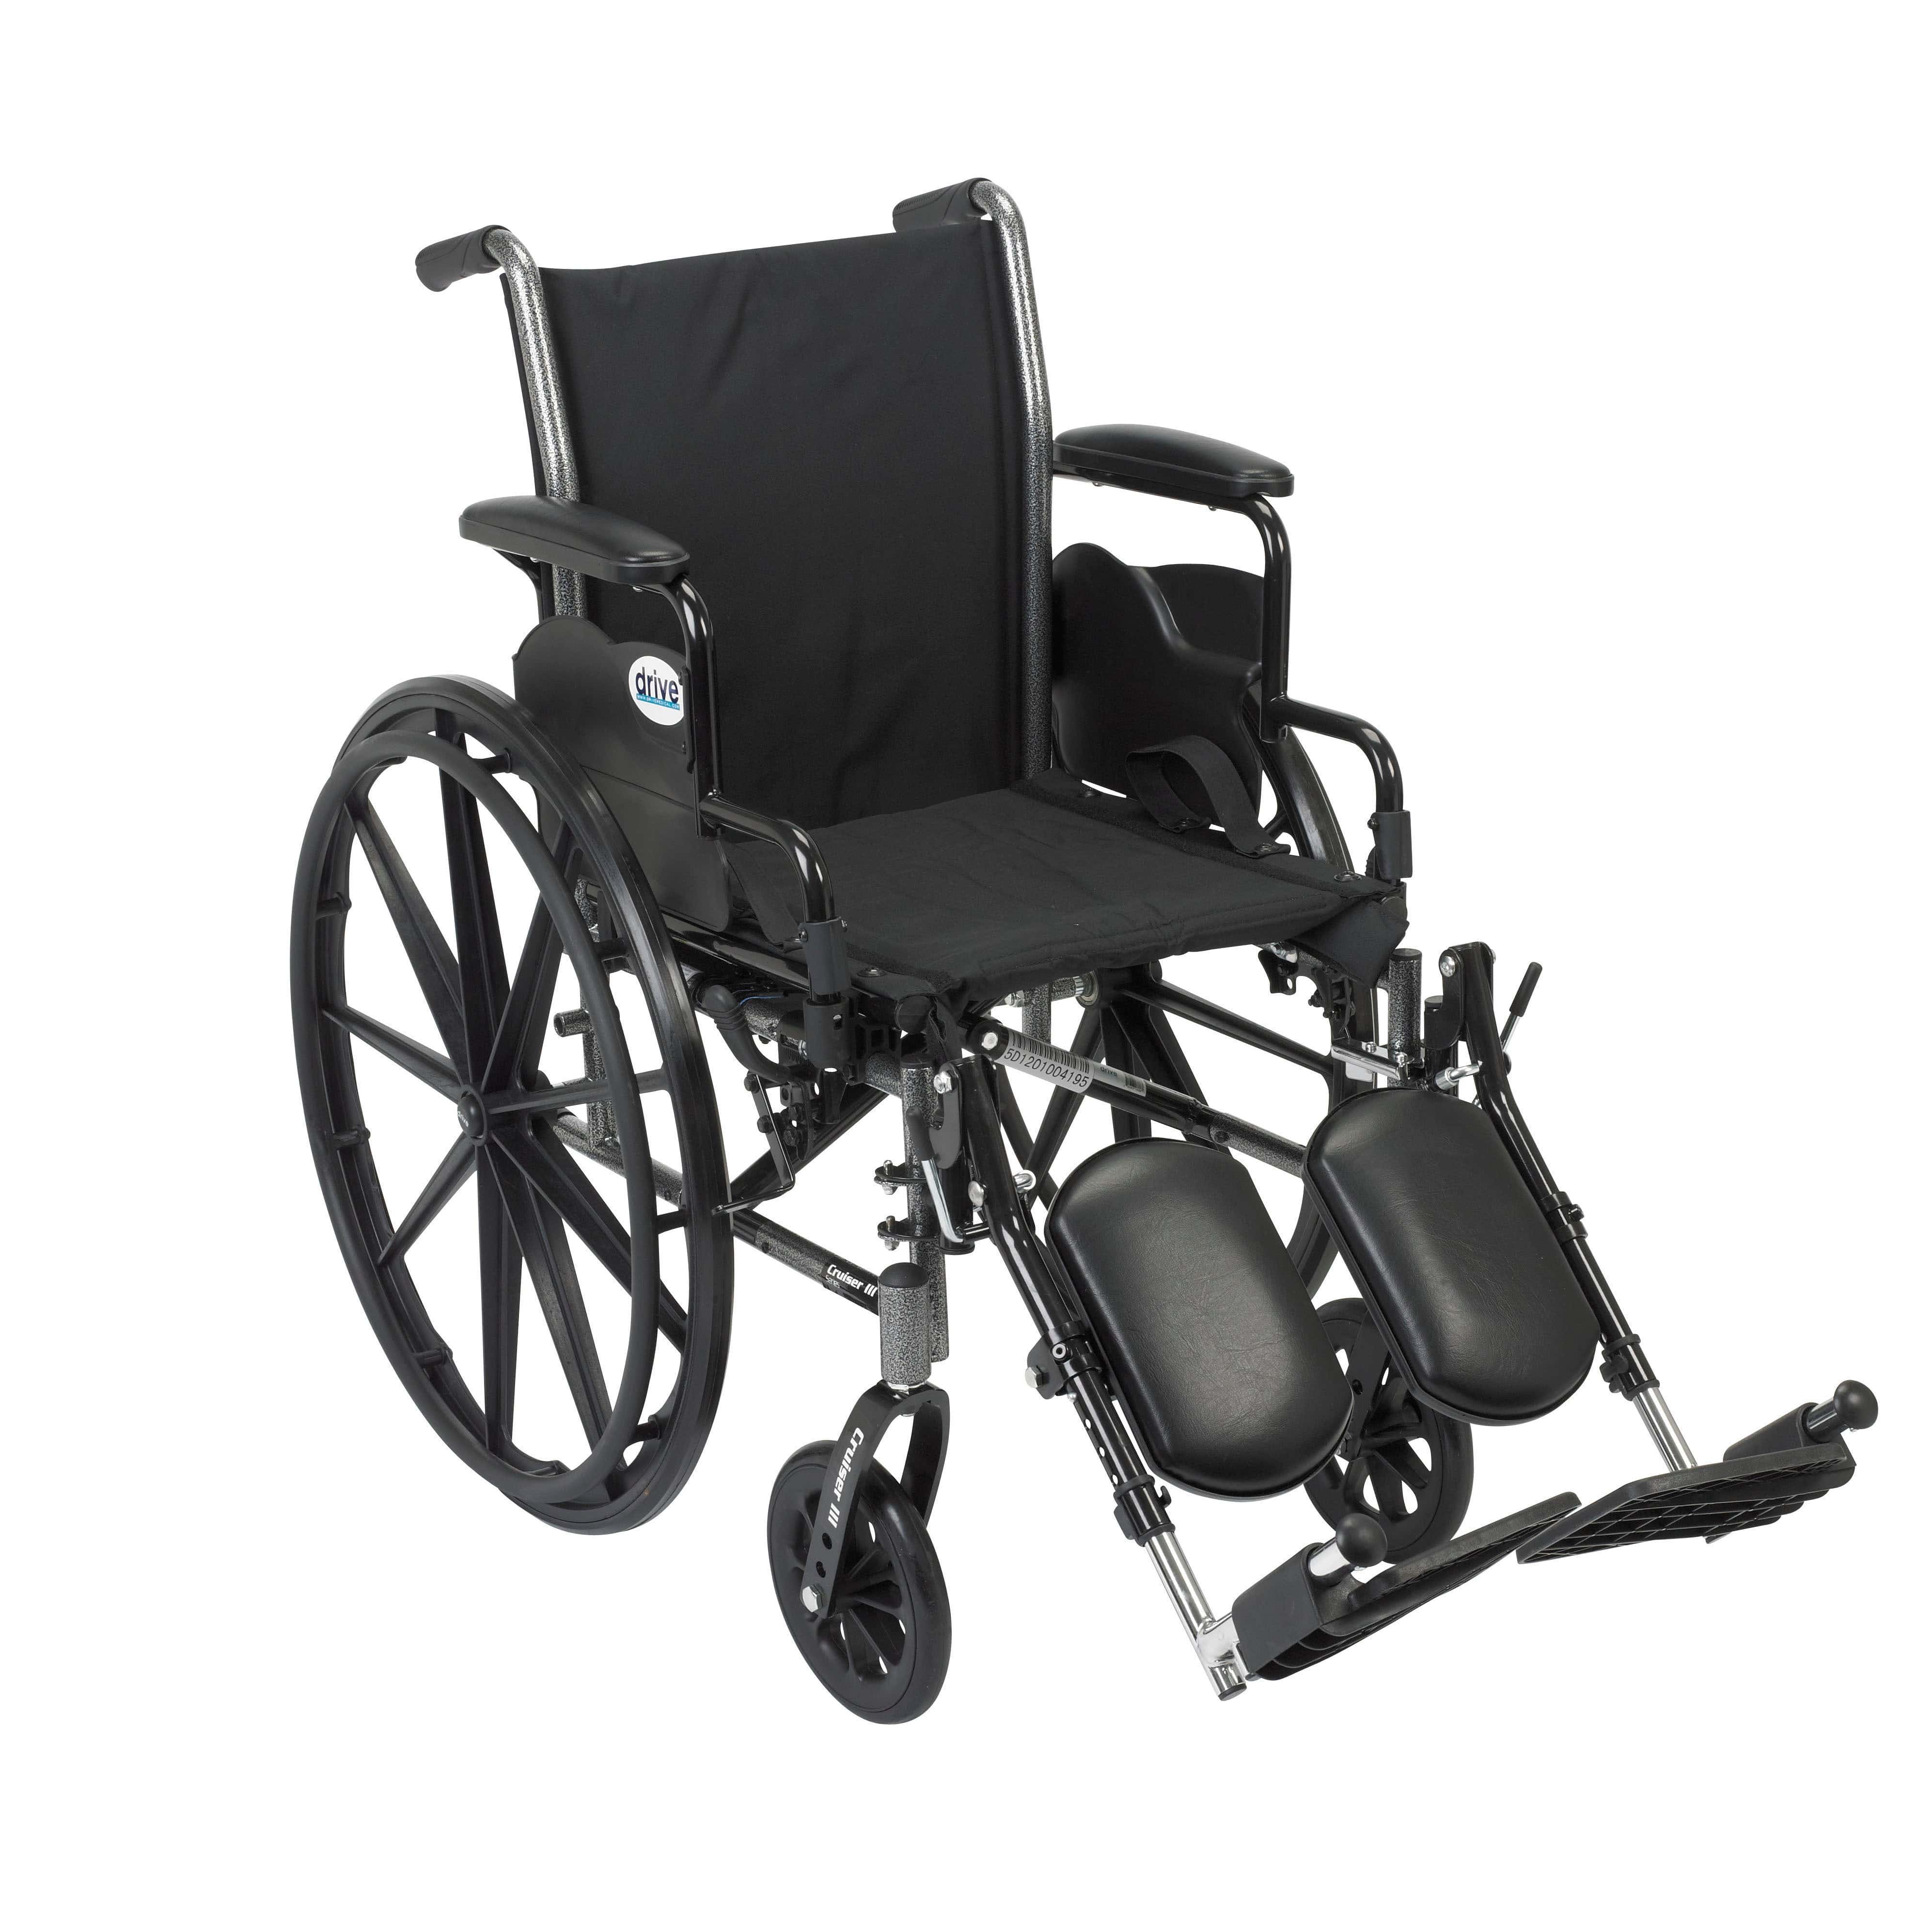 Drive Medical Wheelchairs Flip Back Removable Desk Arms and Elevating Leg Rests / 16" Seat Drive Medical Cruiser III Light Weight Wheelchair with Flip Back Removable Arms